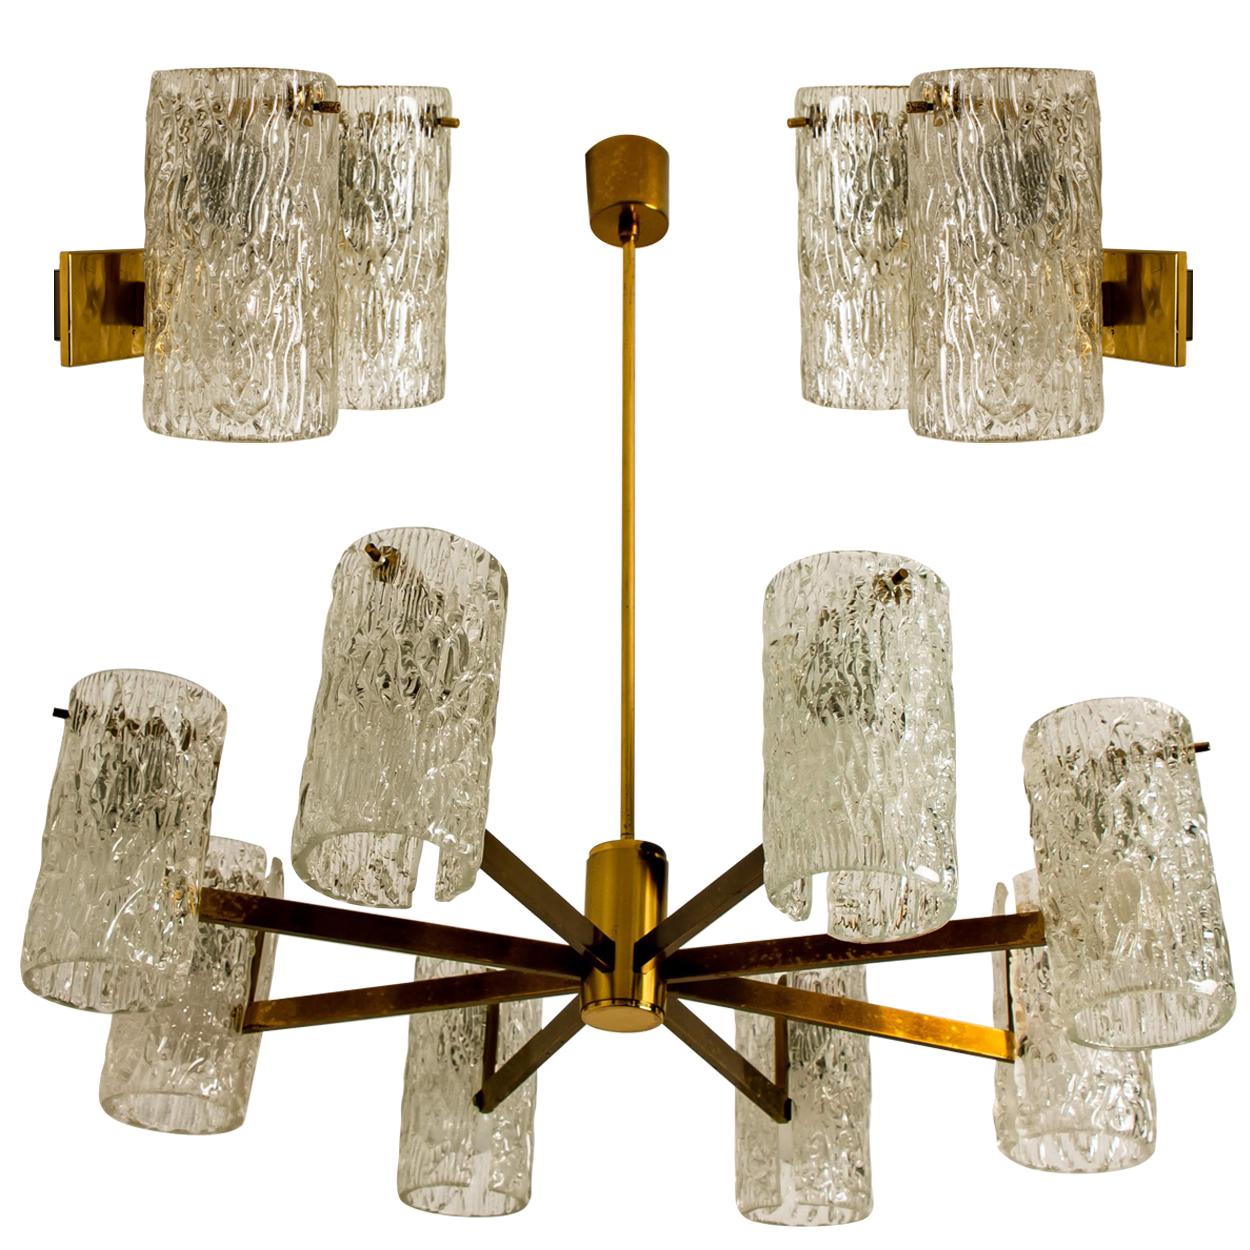 German Pair of Bubble Glass Sconces or Wall Sconces by Hillebrand, 1960s